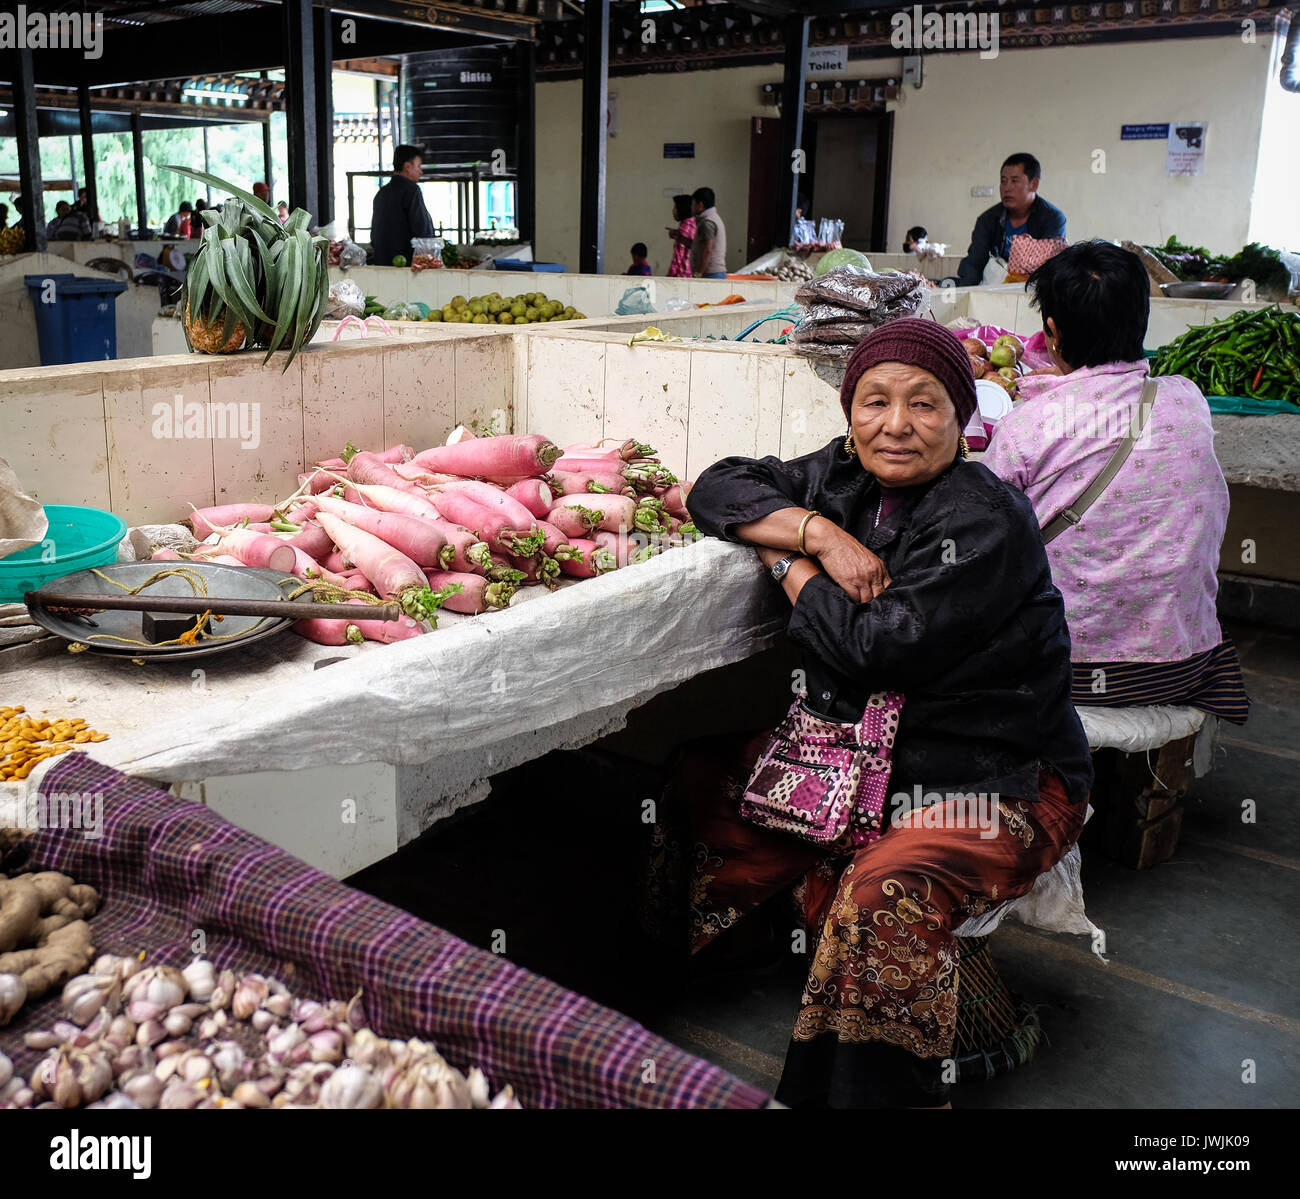 Thimphu, Bhutan - Aug 29, 2015. People at rural market in Thimphu, Bhutan. In South Asia, Bhutan ranks first in economic freedom, ease of doing busine Stock Photo